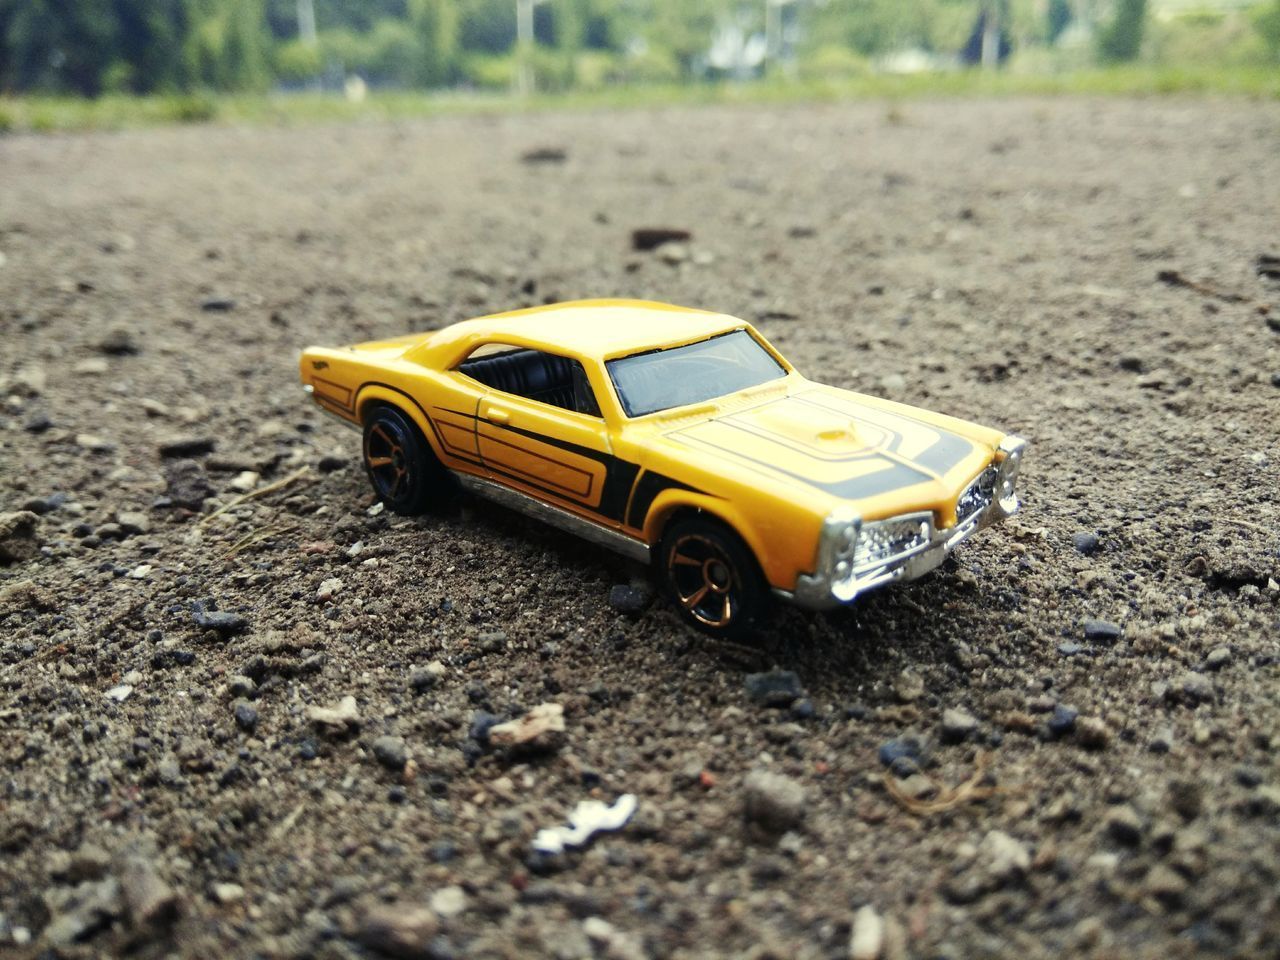 CLOSE-UP OF YELLOW TOY CAR